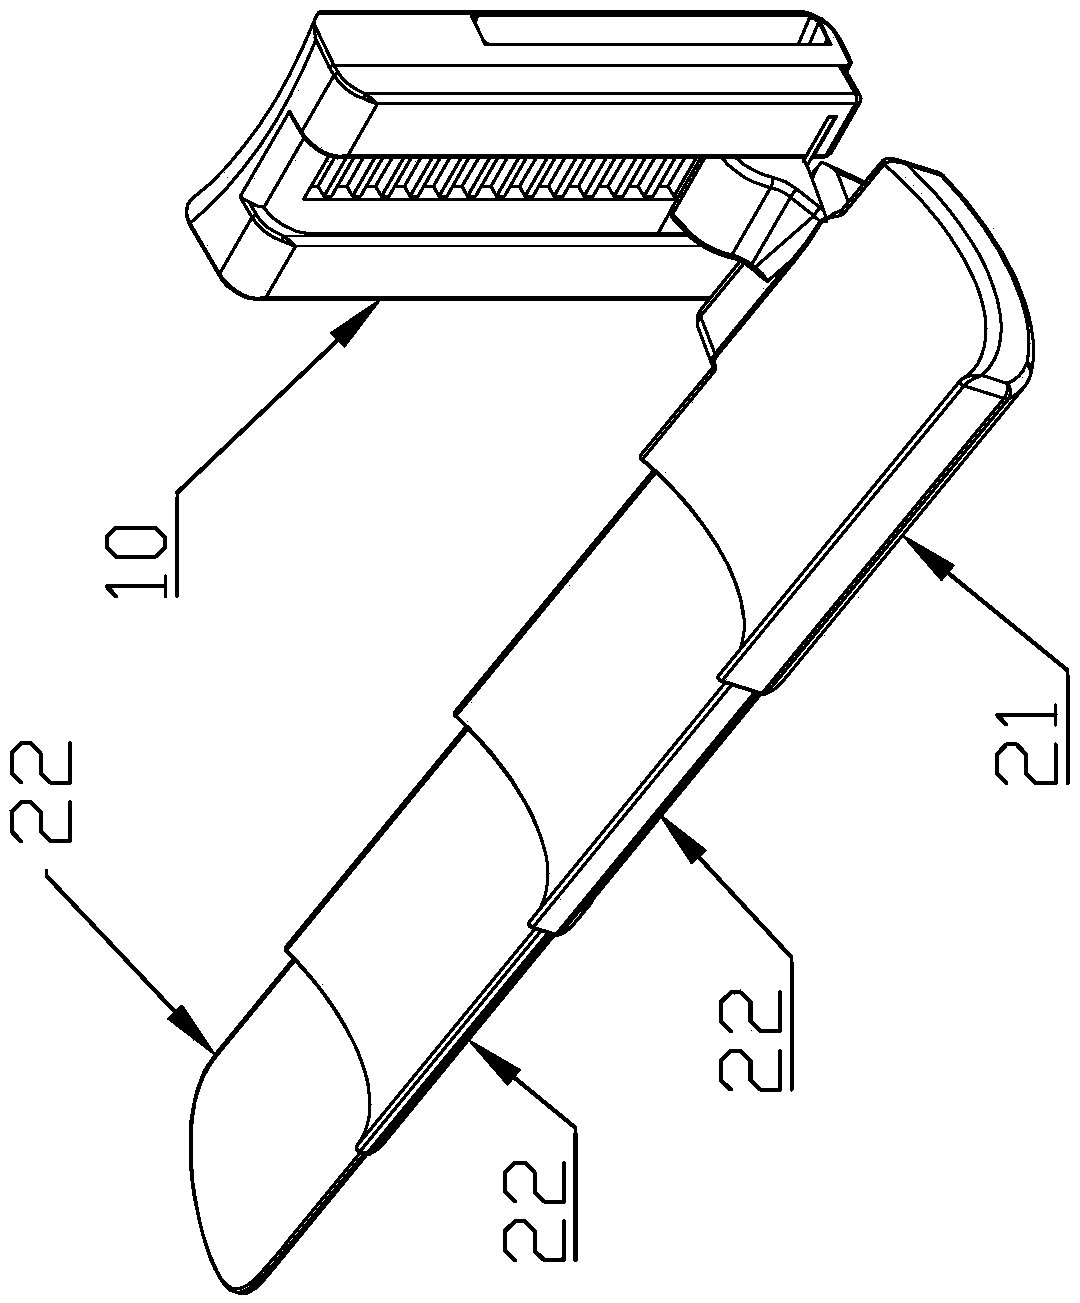 Elbow and forearm supporting device for shoulder joint subluxation rehabilitation